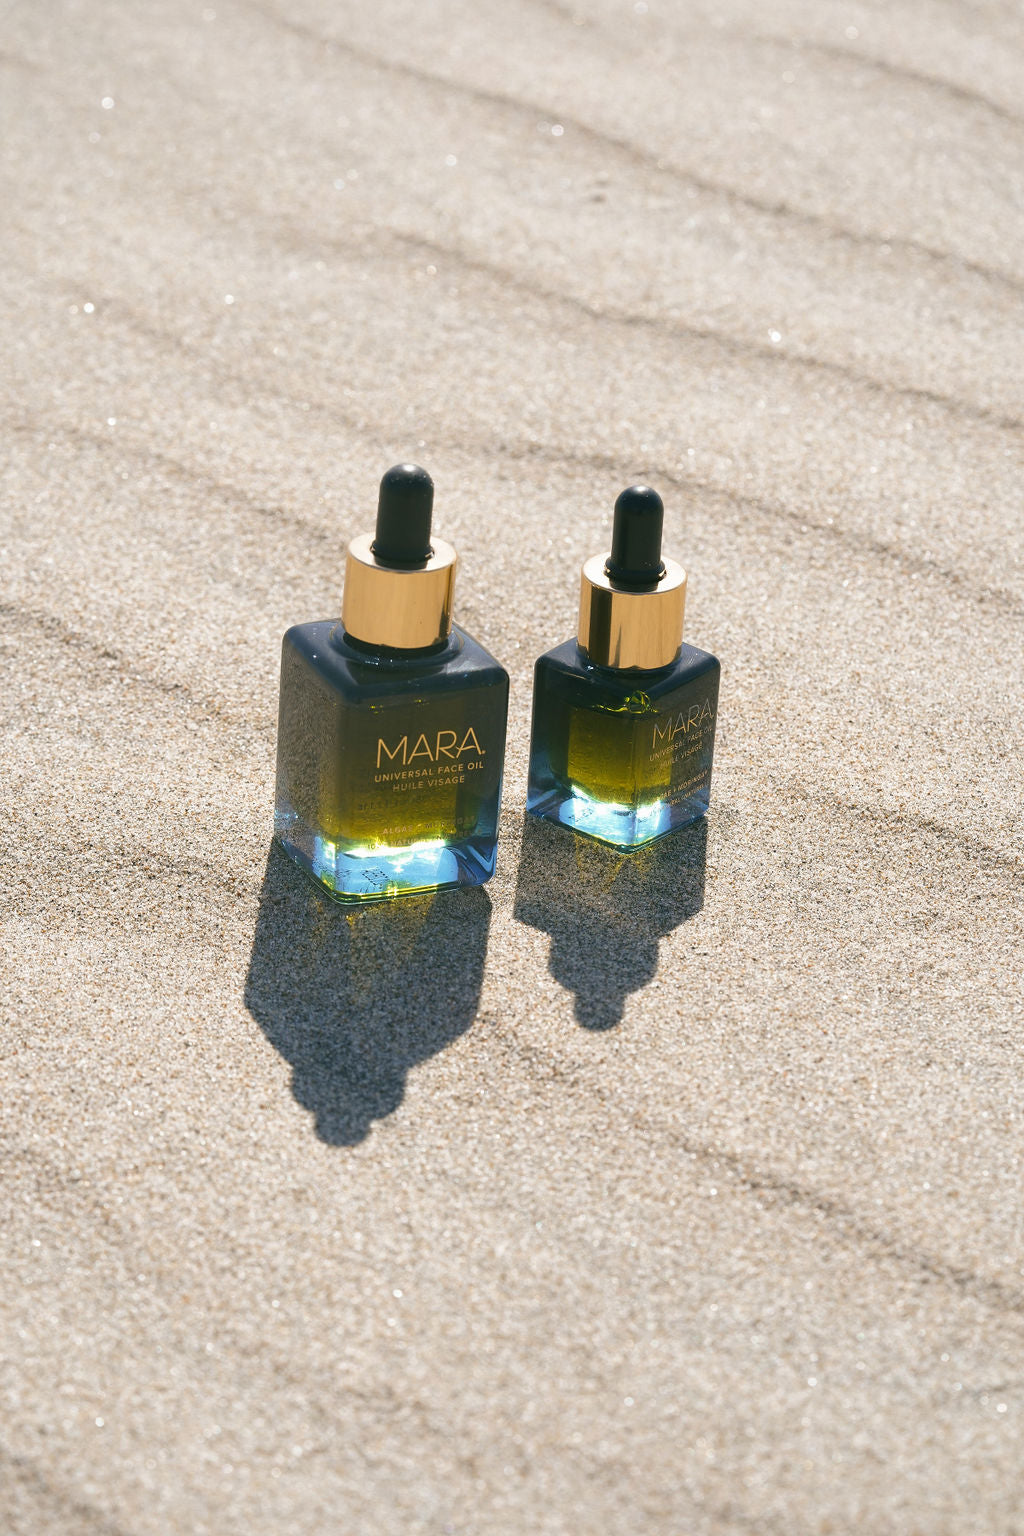 MARA Universal Face Oil full size and travel size